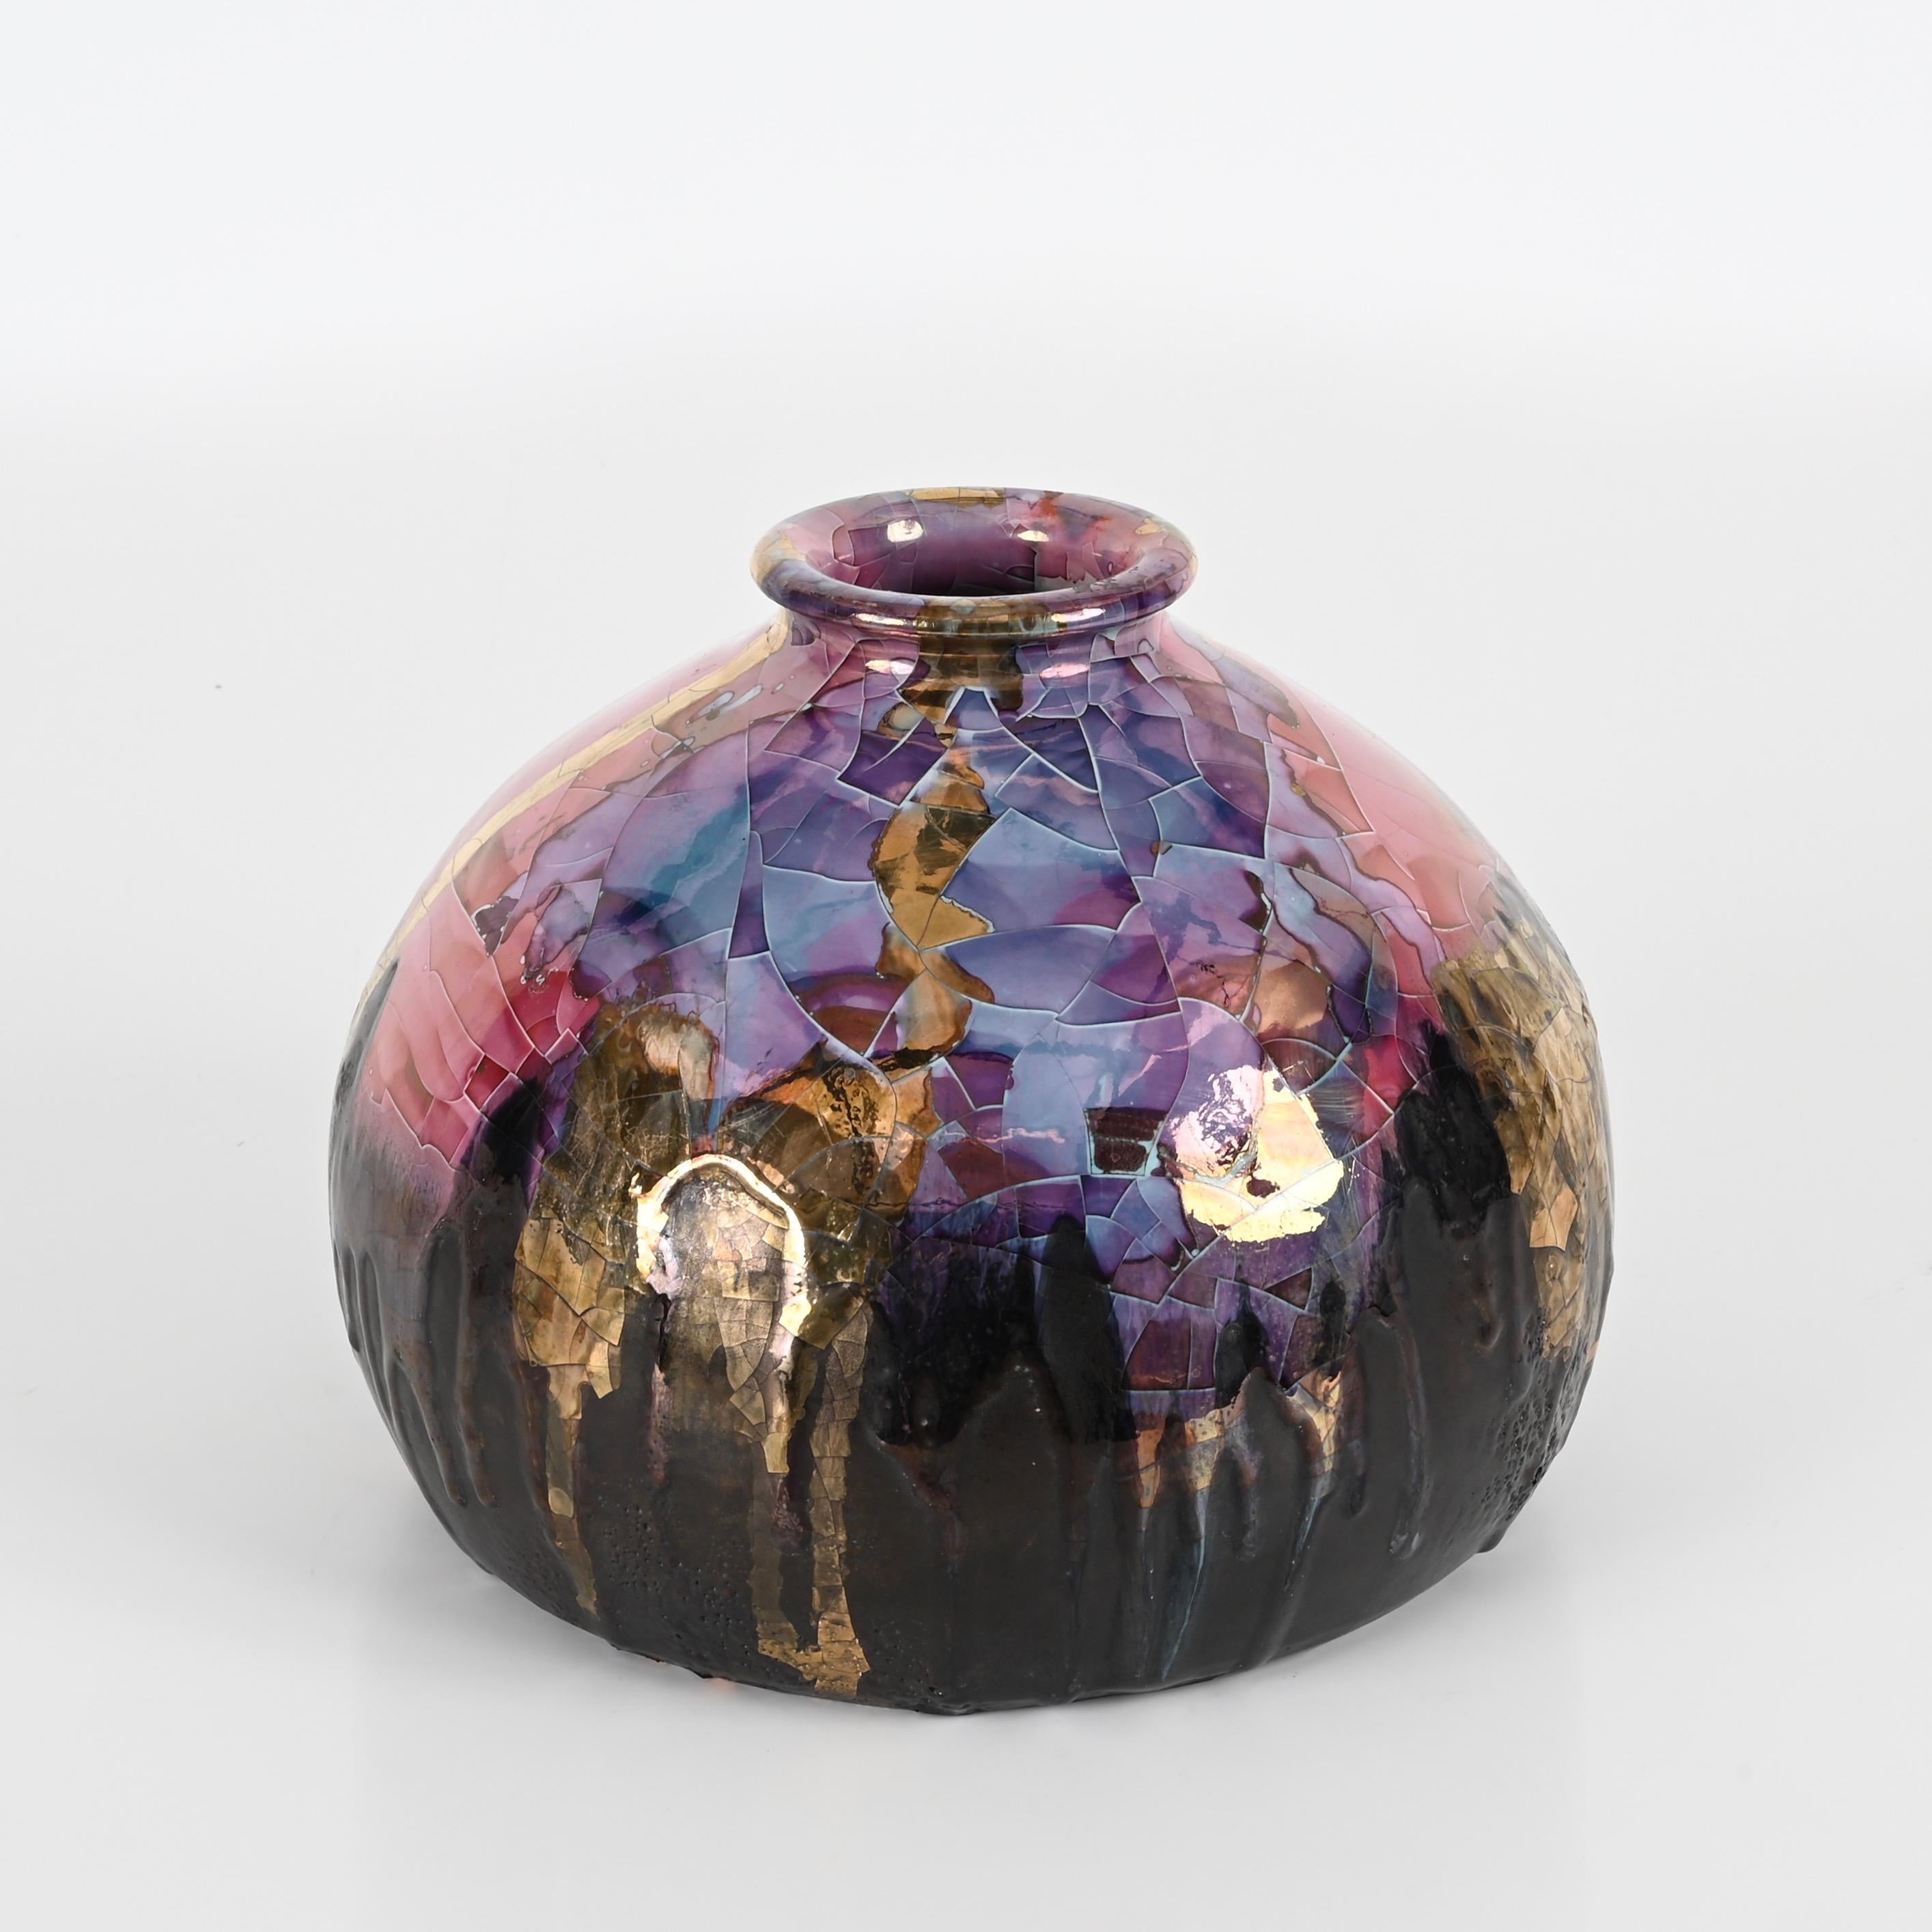 Stunning polychrome enameled ceramic vase designed and signed on the bottom by Claudio Pulli, one of the greated Sardinian artists of the 20th century. This charming vase was realized in Italy during the 1970s.  

This gorgeous round-shaped vase is